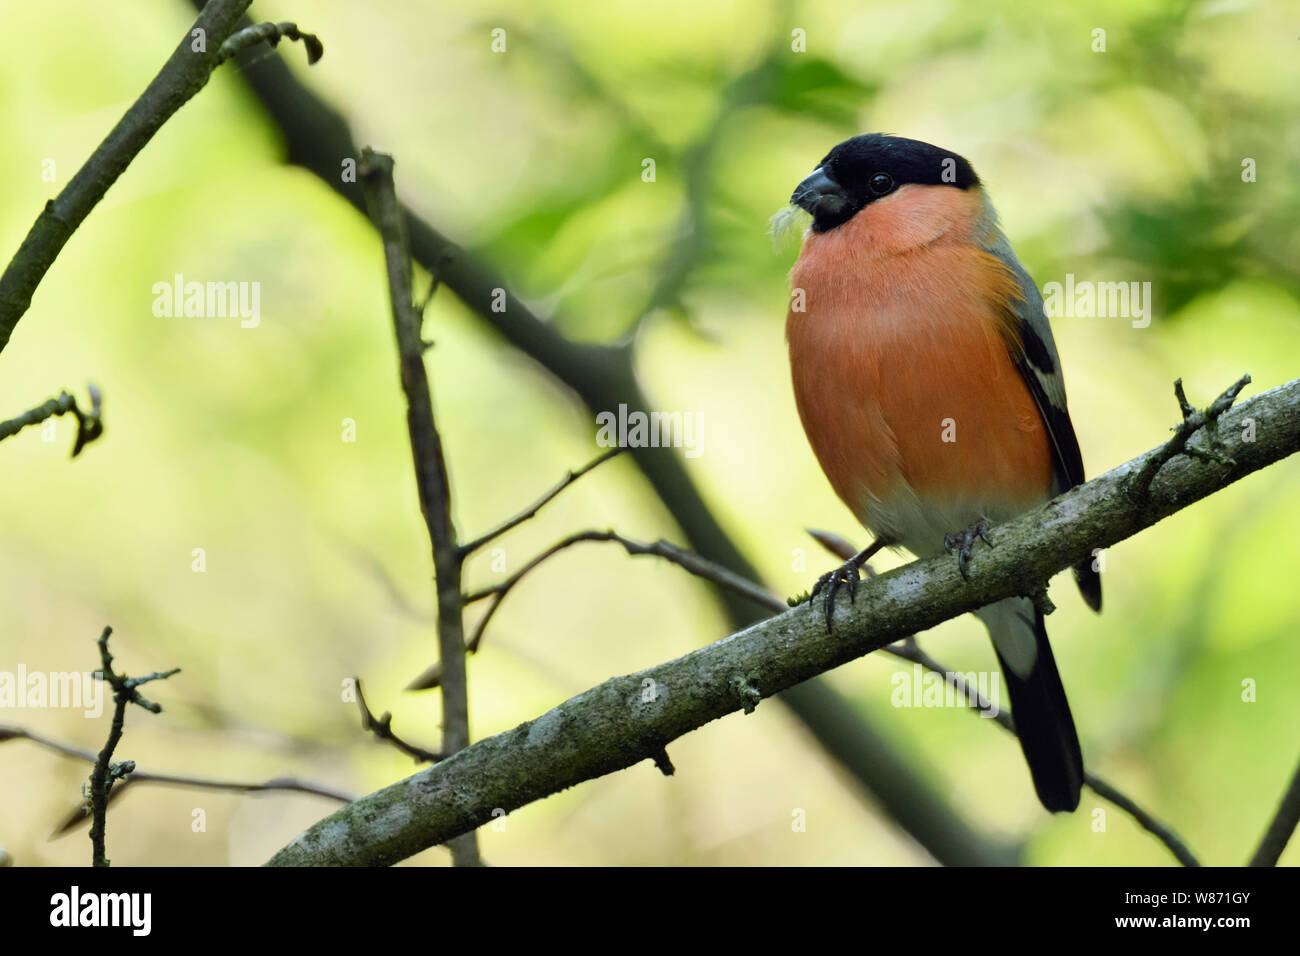 Eurasian Bullfinch ( Pyrrhula pyrrhula ), male in breeding dress, perched on a branch in some bushes, natural setting, wildlife, Europe. Stock Photo